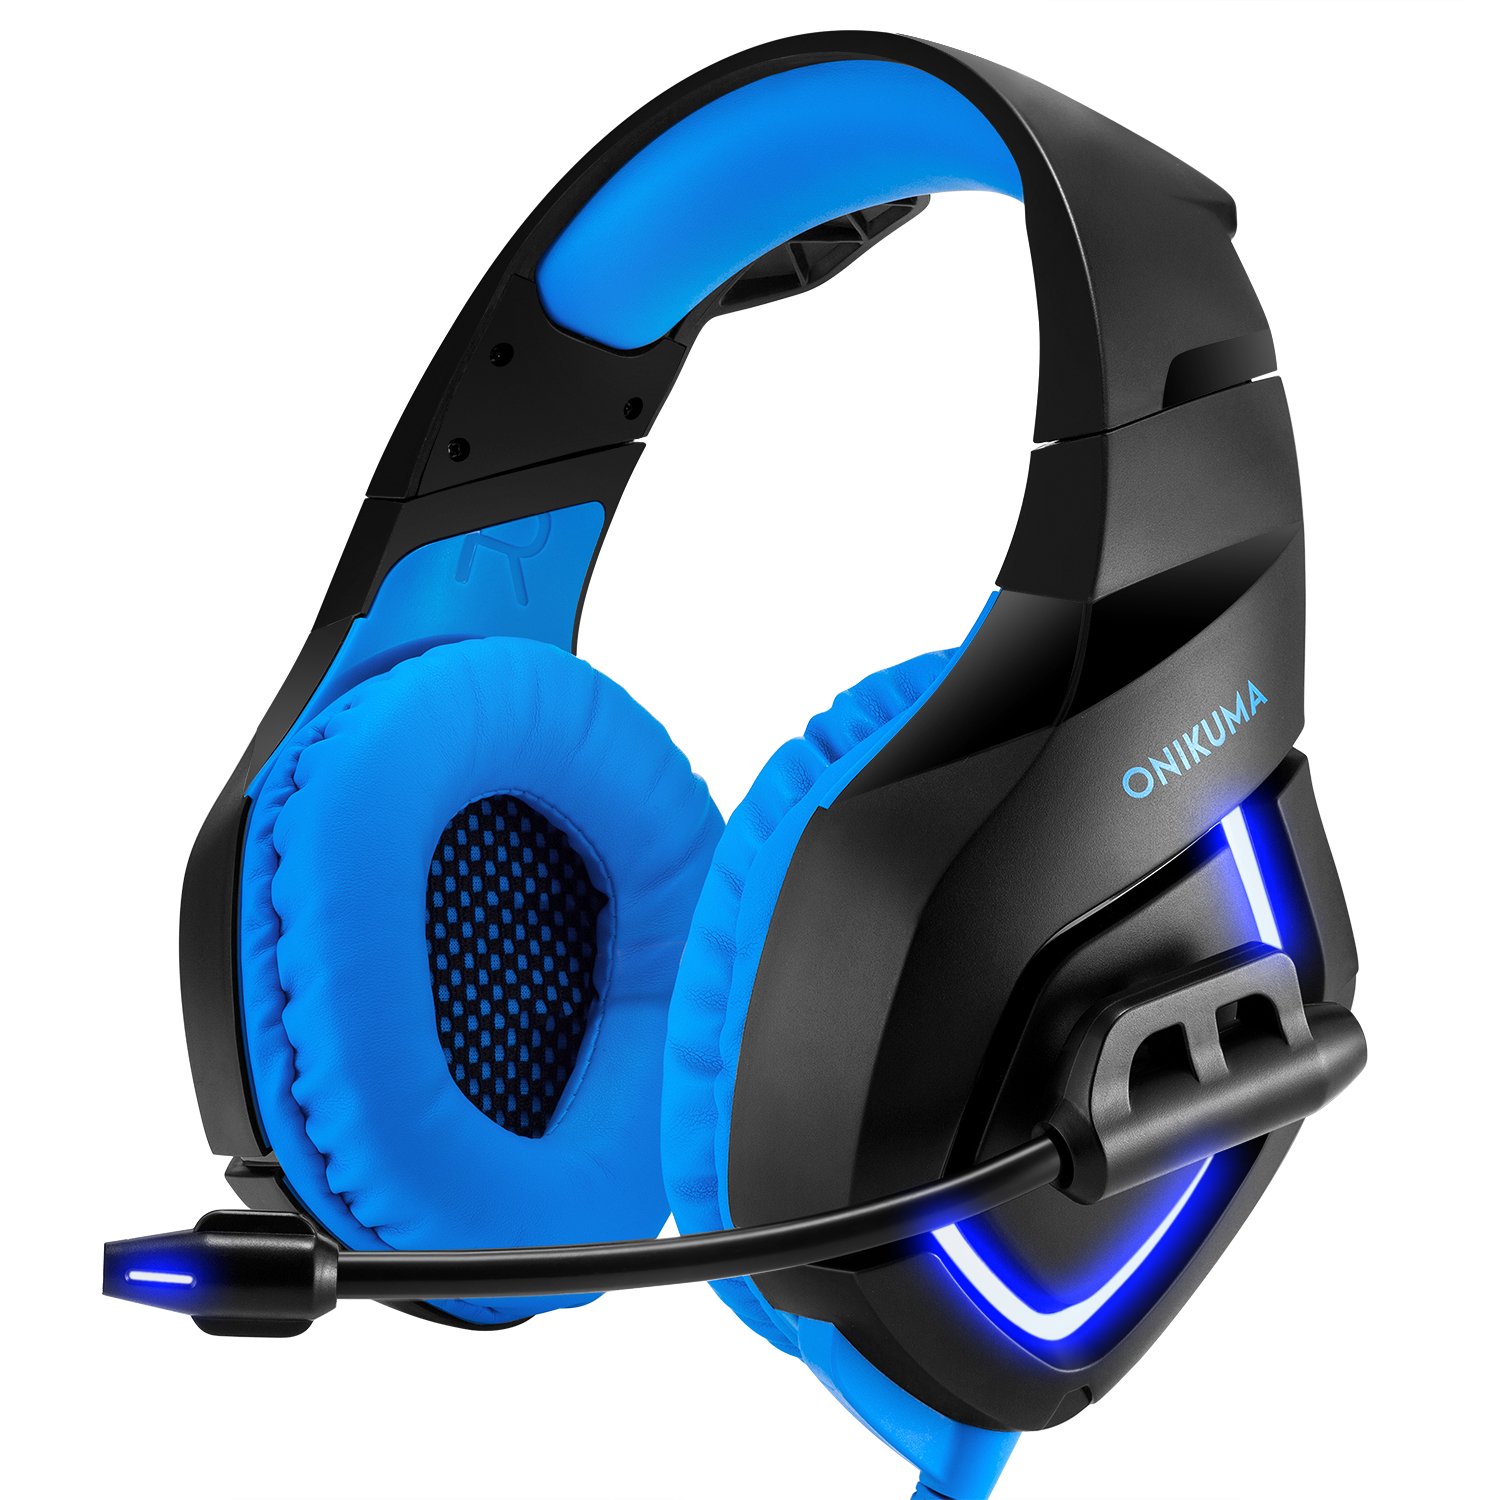 ONIKUMA K1-B with LED Black and Blue Gaming Headset Wired Stereo Game Headphones Noise-canceling Gaming Headphone with Mic compatible with PS4 Xbox Laptop Computer Cellphone